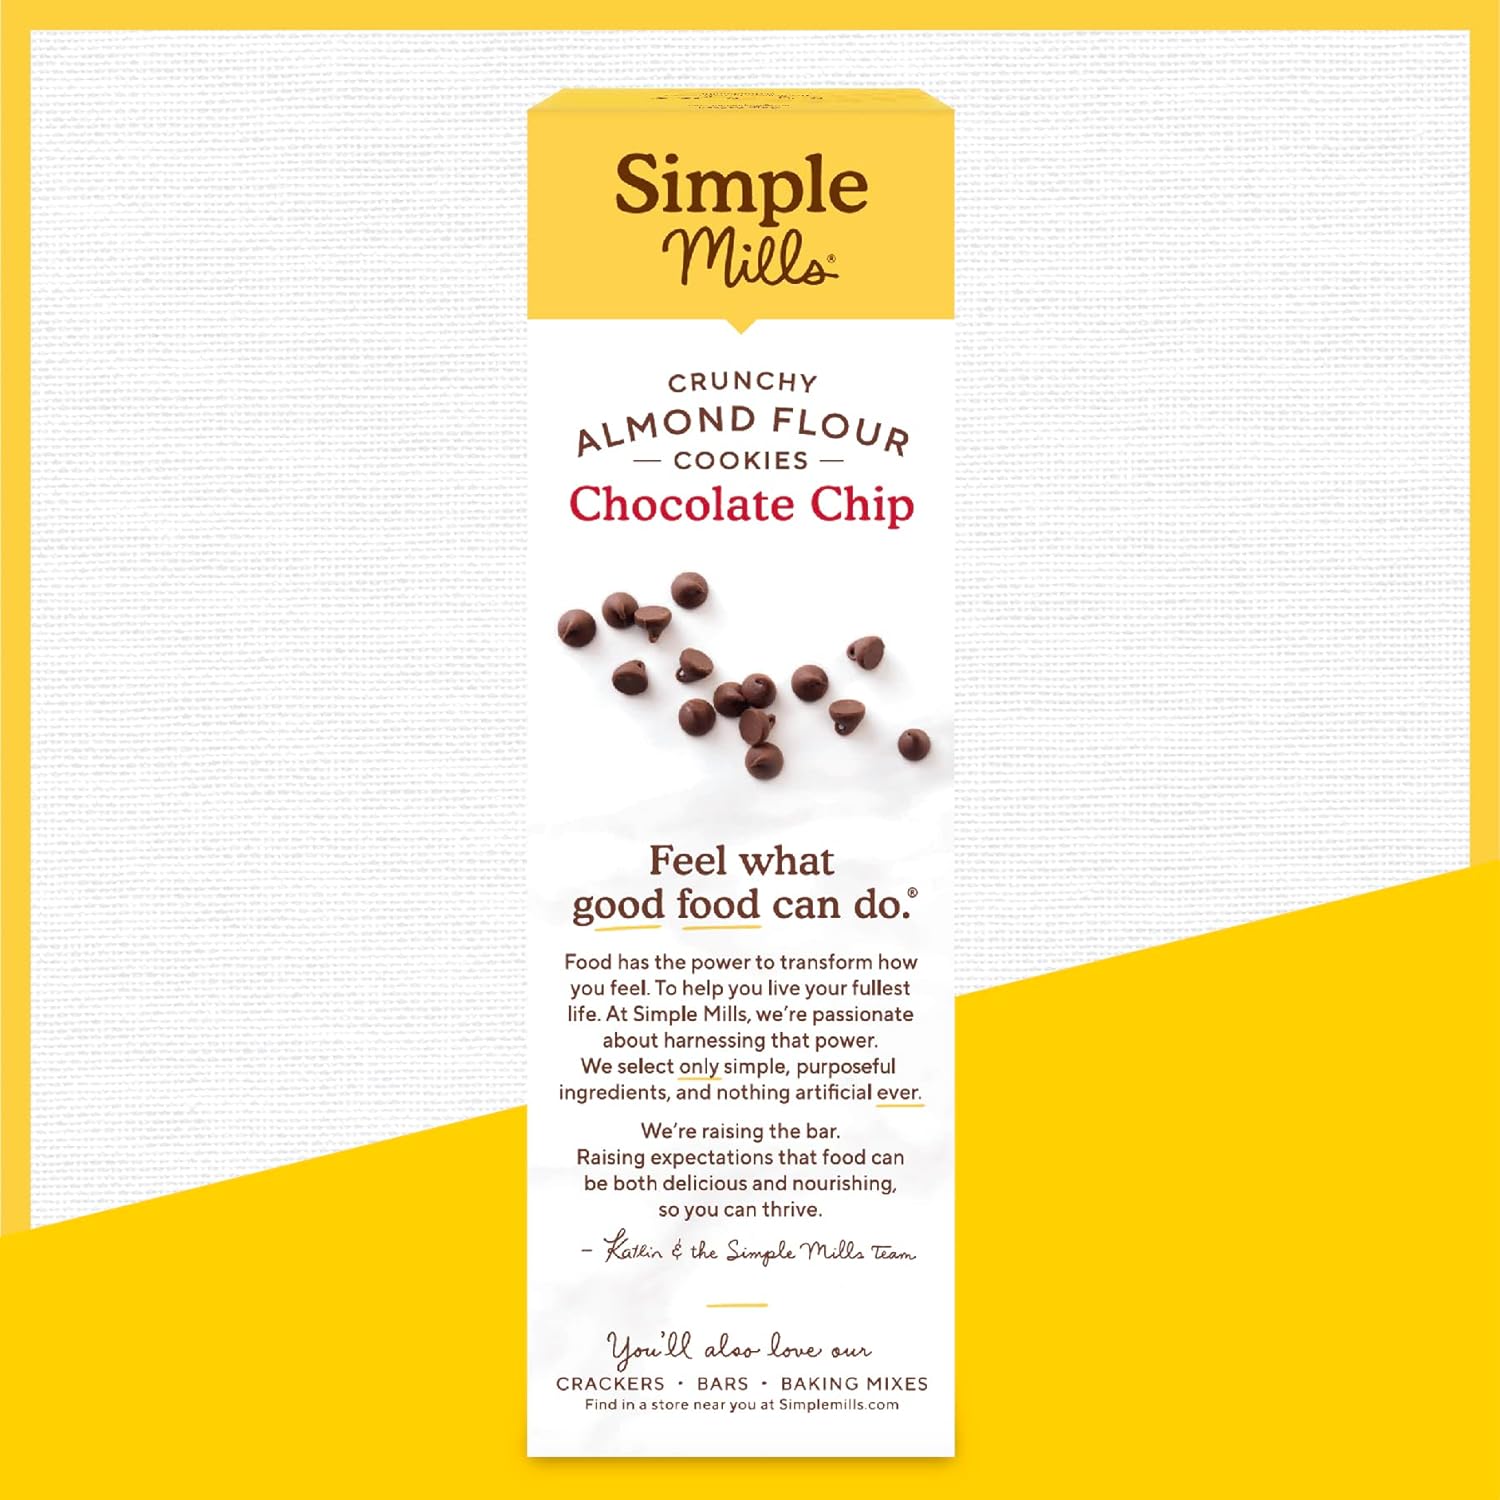 Simple Mills Almond Flour Crunchy Cookies, Chocolate Chip - Gluten Free, Vegan, Healthy Snacks, Made with Organic Coconut Oil, 5.5 Ounce (Pack of 1) : Grocery & Gourmet Food